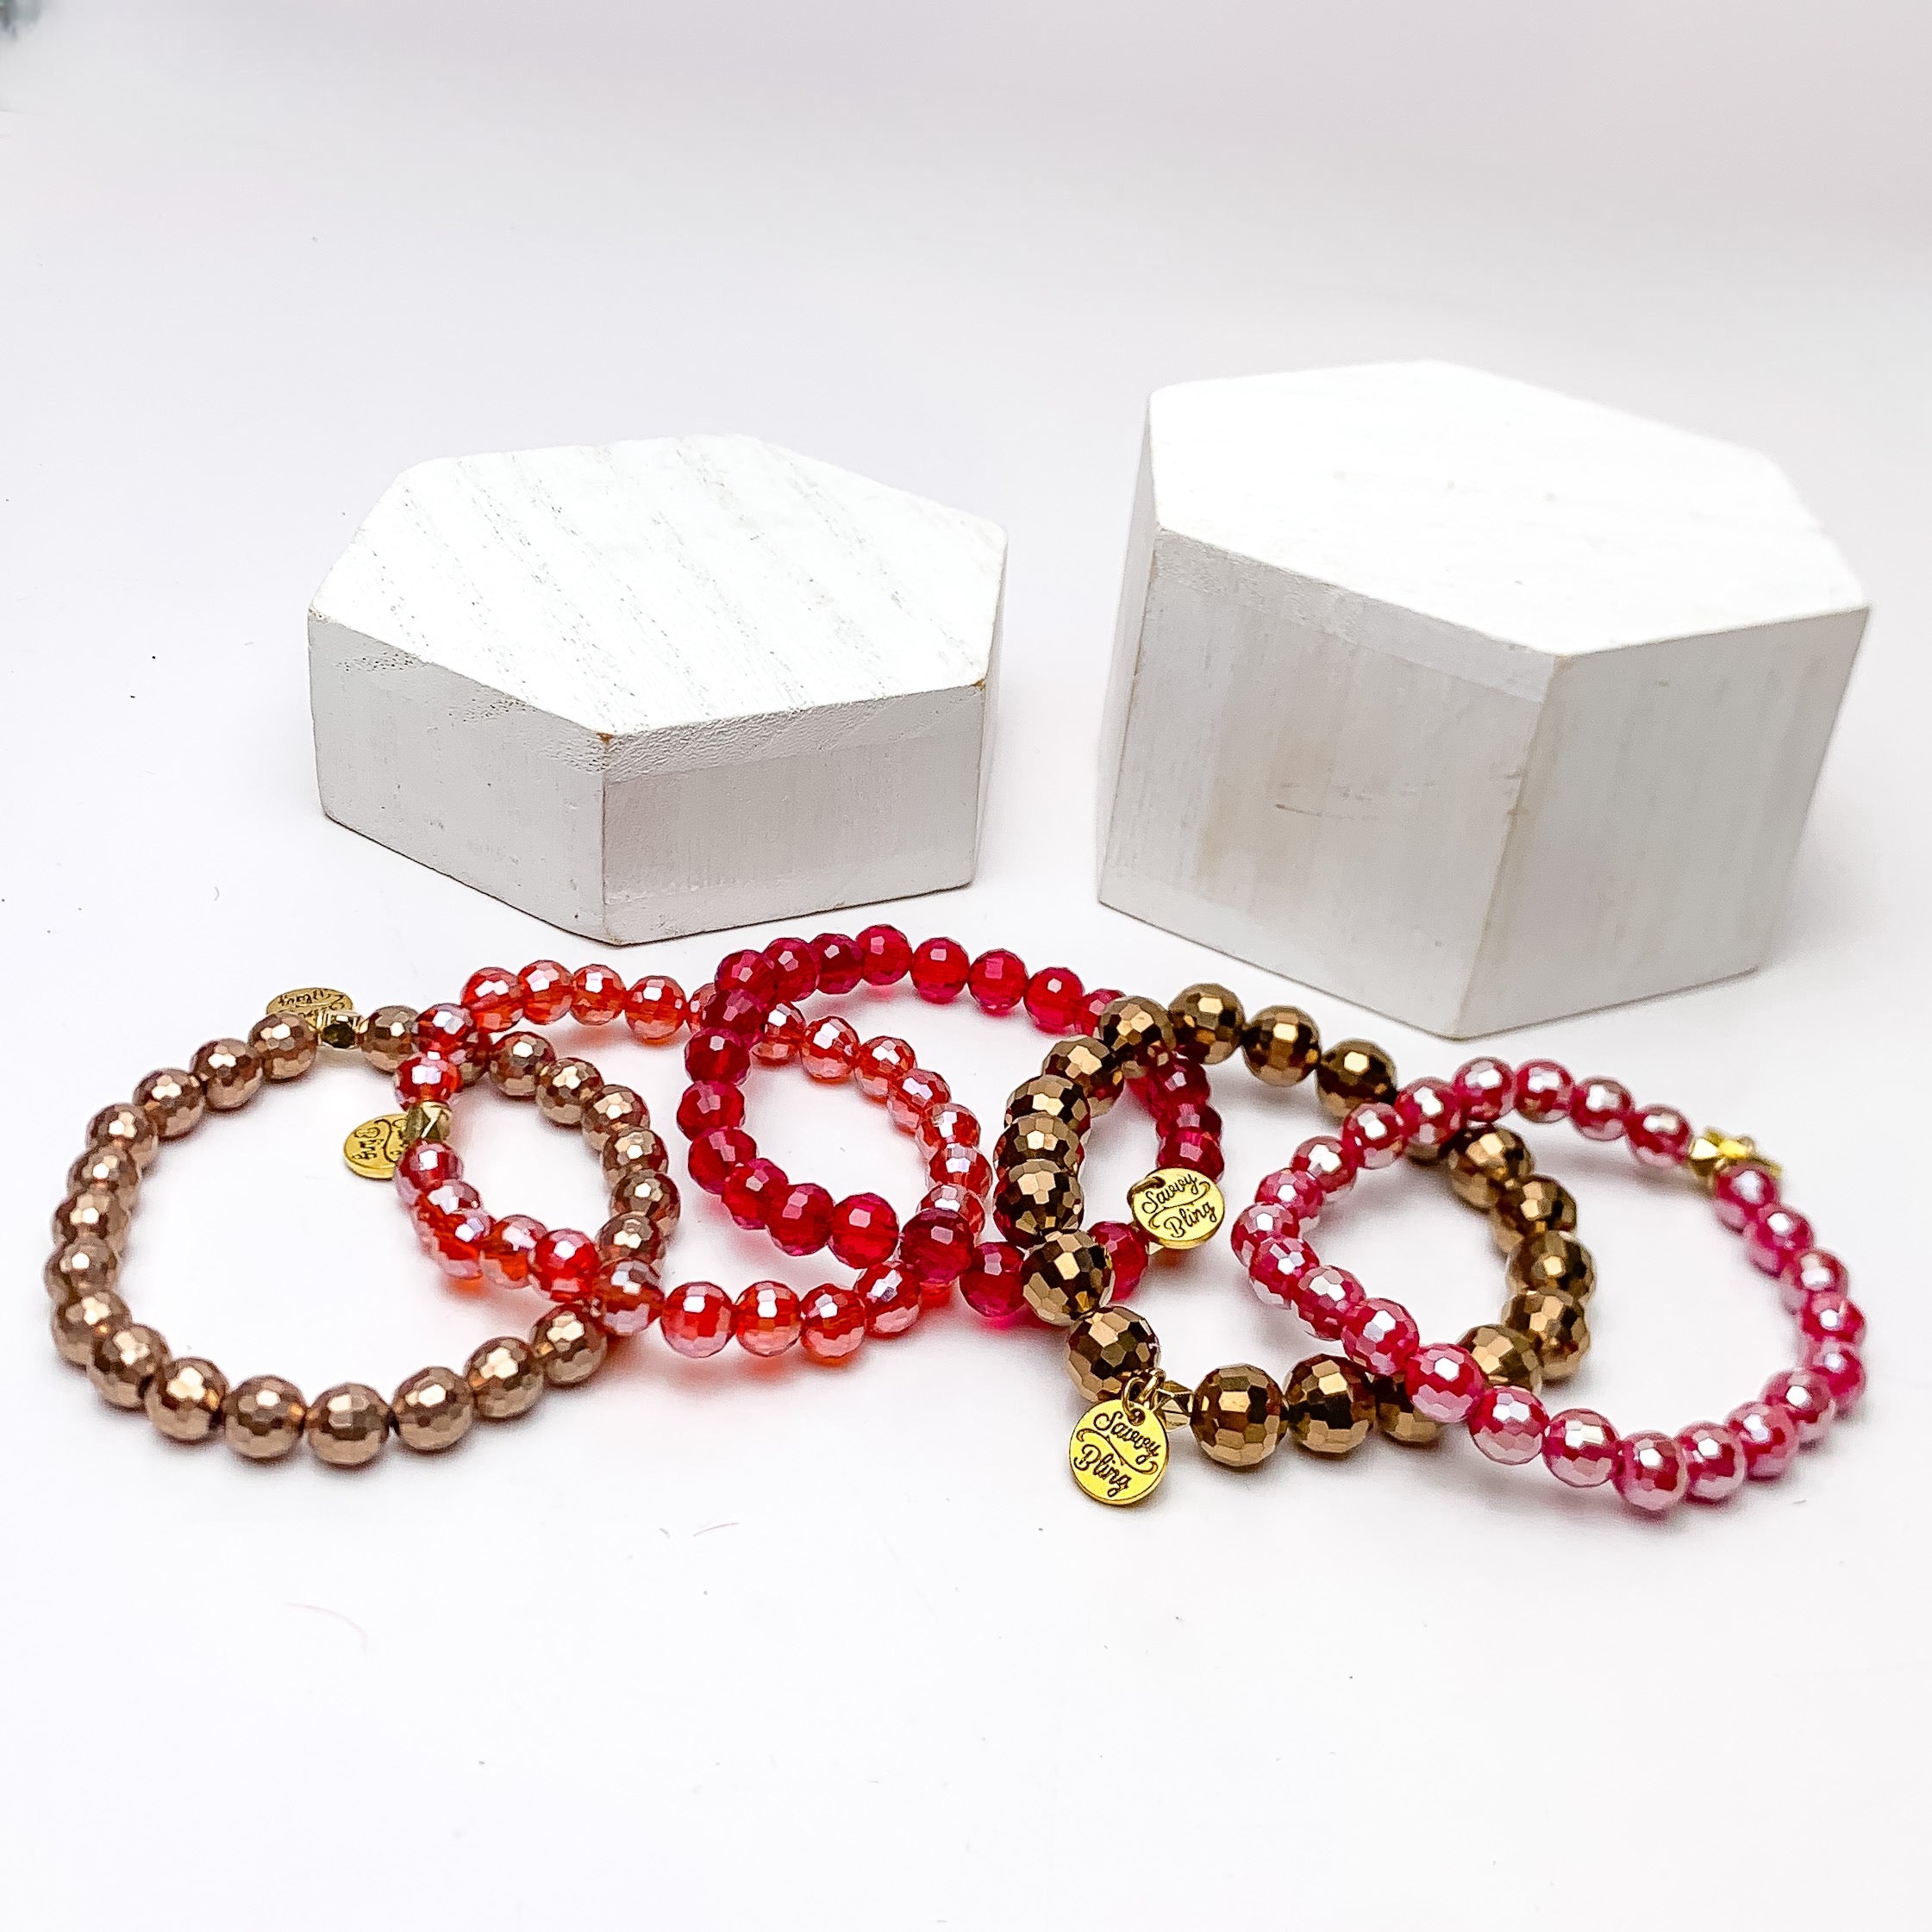 Set of Five | All Nighter Crystal Beaded Bracelet Set in Red and Gold Tones. These bracelets are pictured on a white background with two white podiums behind them.